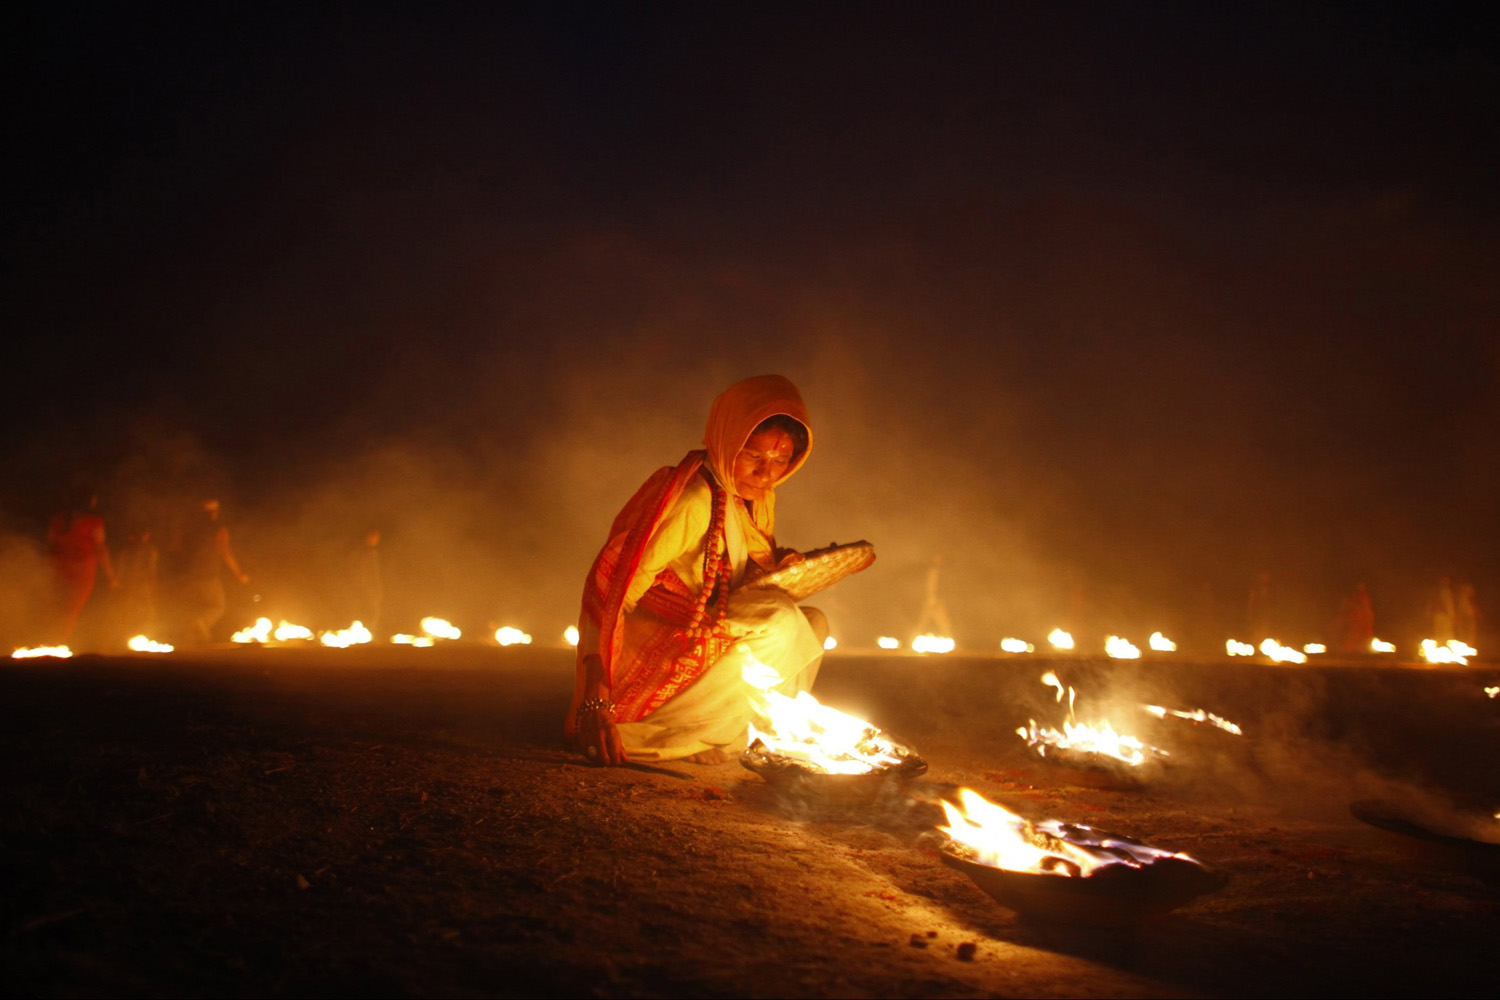 Apr. 22, 2014. A Nepalese Hindu devotee lights an oil lamp during the last day of a Mahayagya, holy rituals that last for seven days, near Pashupatinath temple in Katmandu, Nepal.